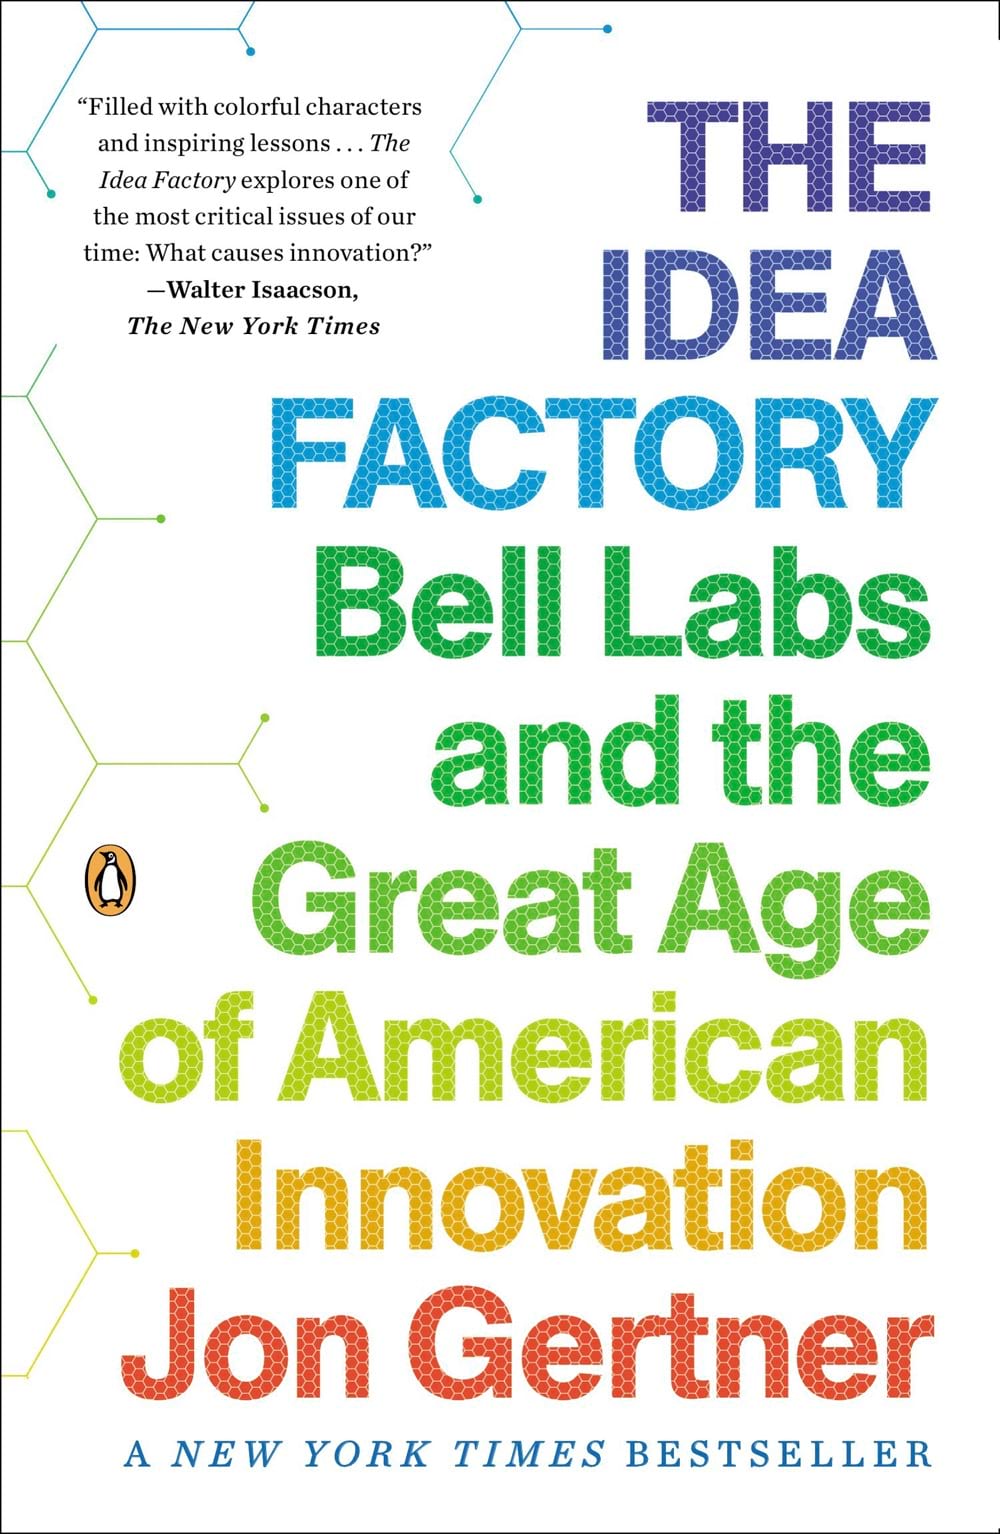 The cover of The Idea Factory